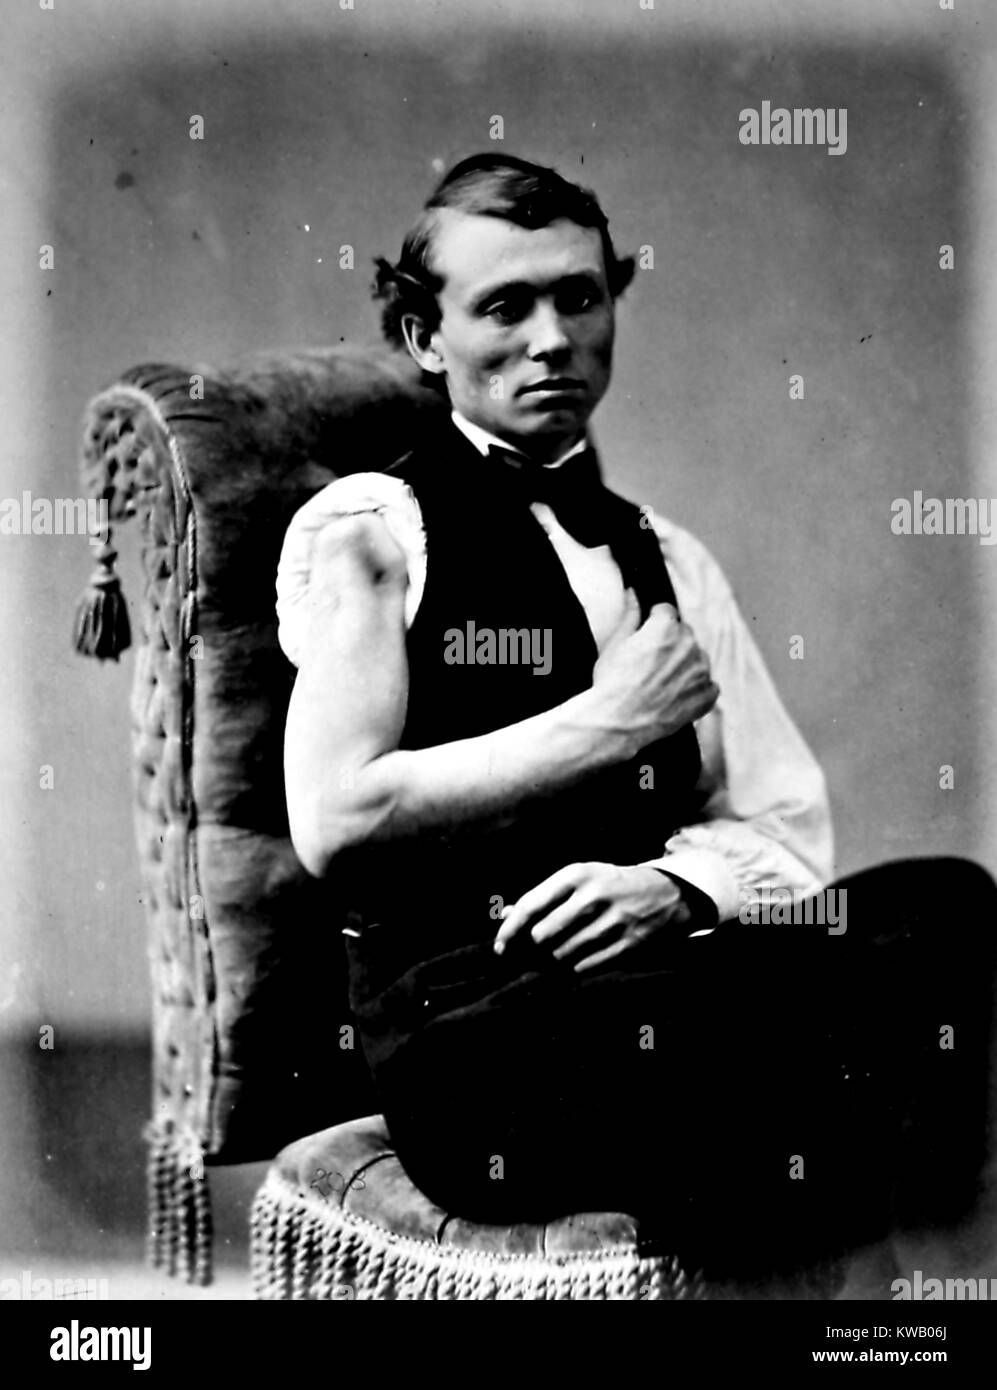 Photograph of a wounded soldier from the American Civil War, showing an upper arm wound which was repaired surgically, Virginia, 1865. Courtesy Internet Archive. Stock Photo